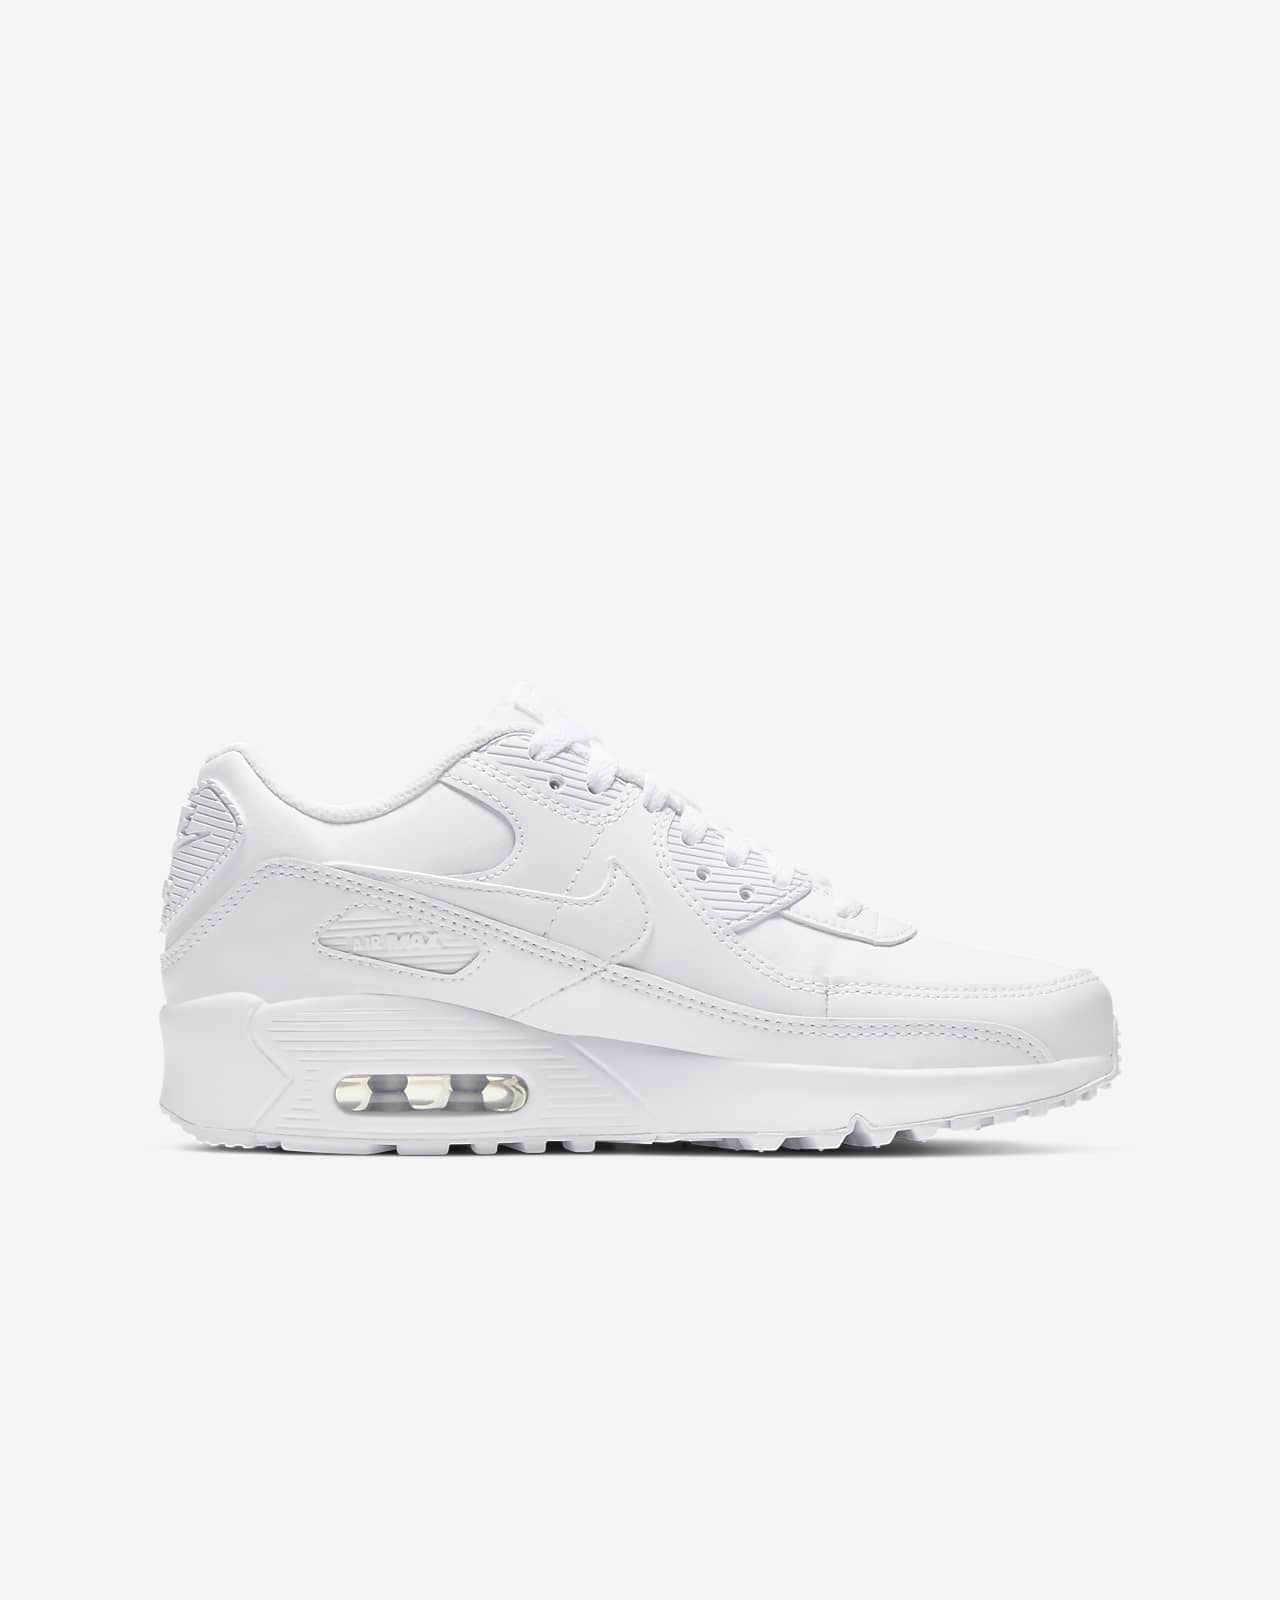 air max 90 ltr unisex adulti